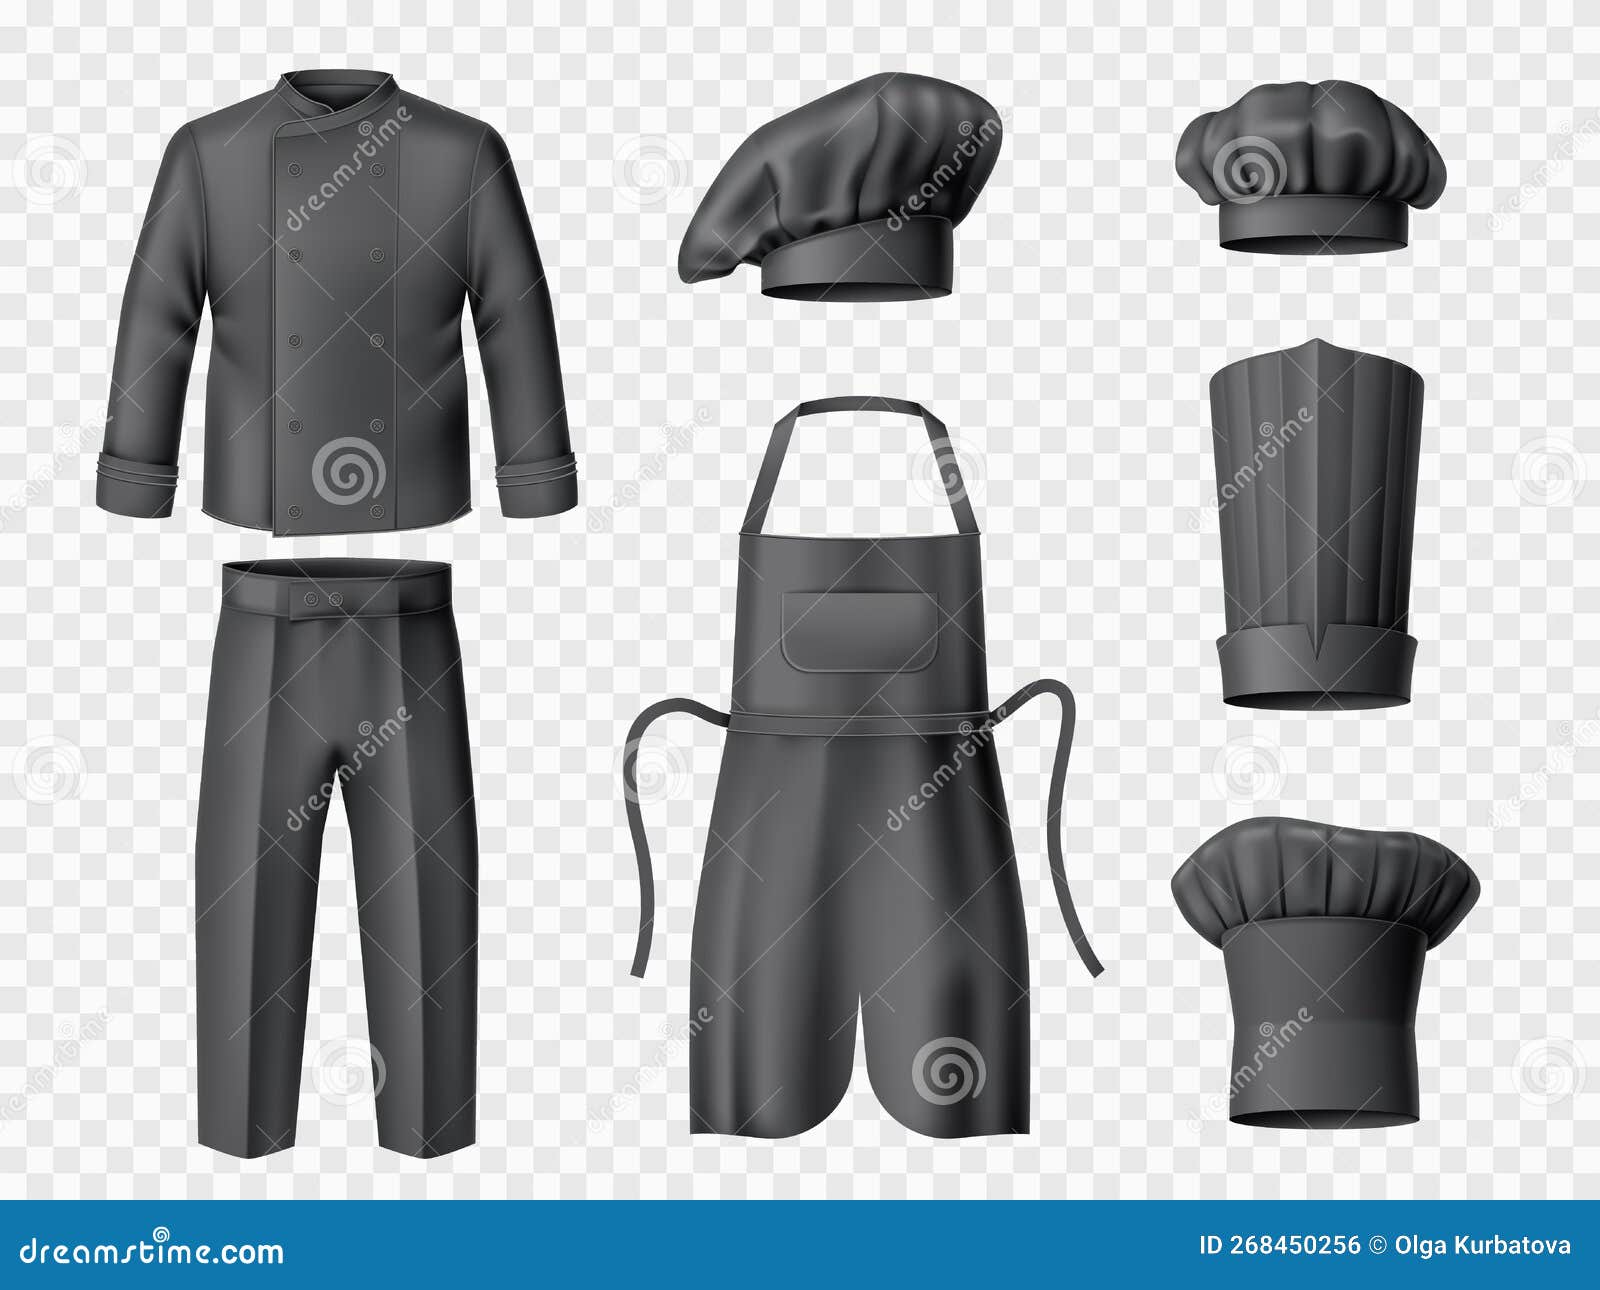 The Fascinating History of the Chefs Uniform  CIA Culinary School